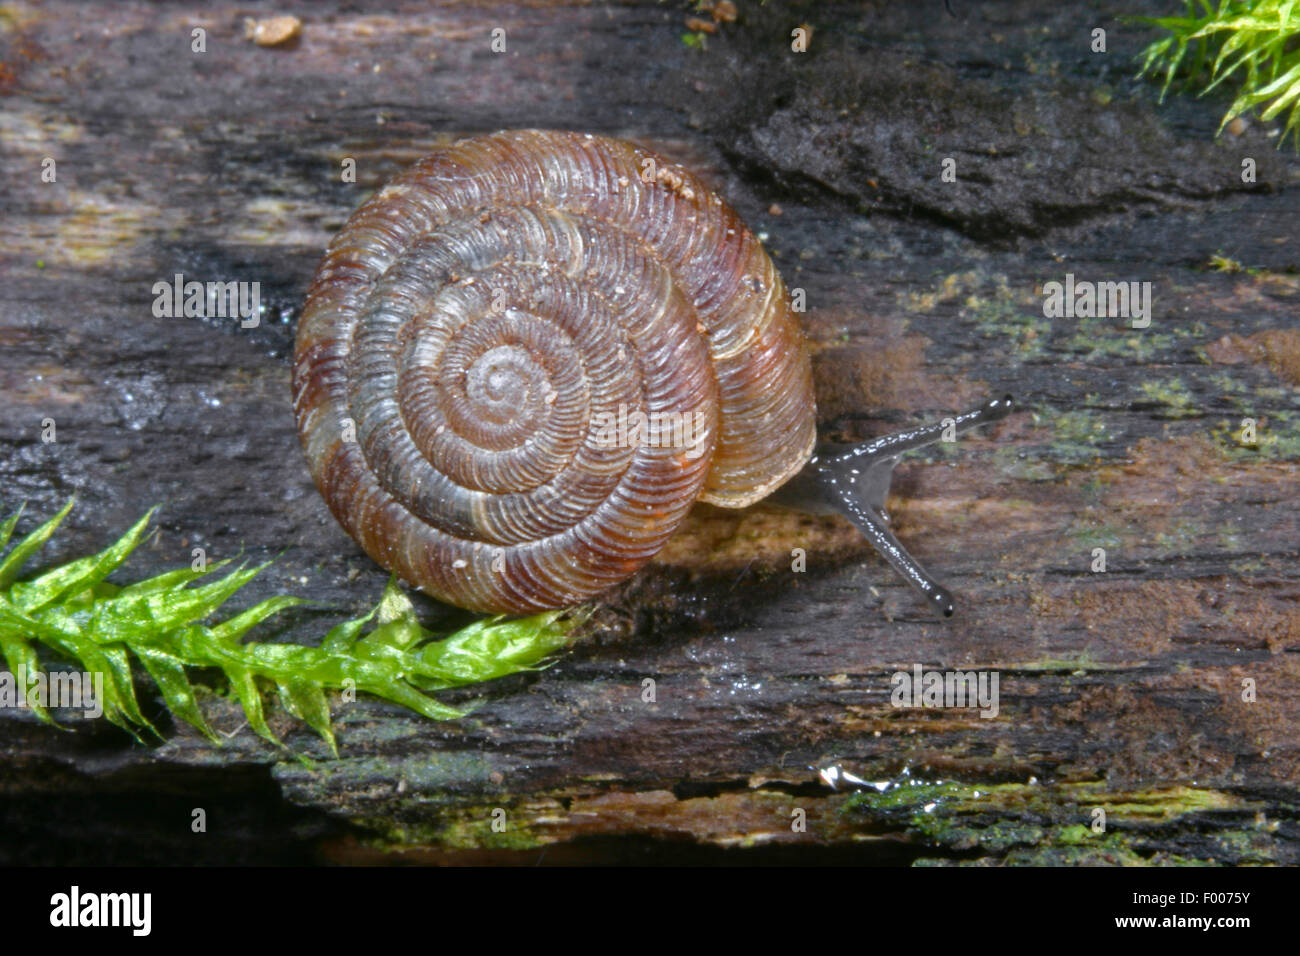 Rounded snail, Rotund disc snail, Radiated snail (Discus rotundatus, Goniodiscus rotundatus), crepping on wood Stock Photo